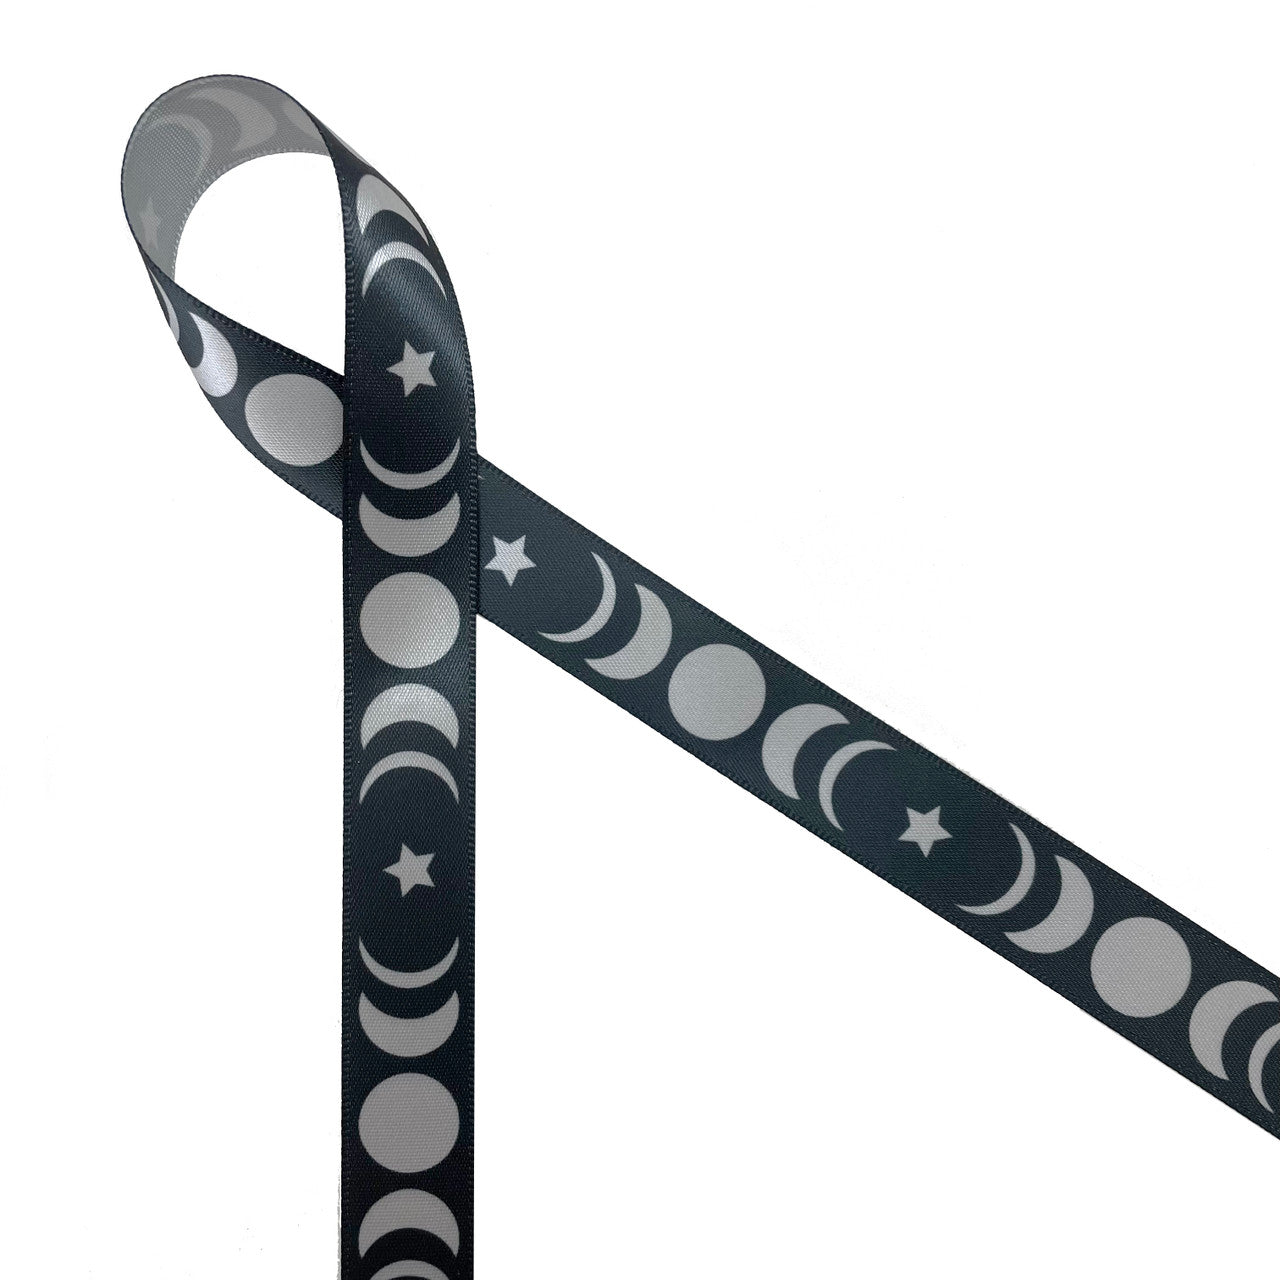 Moon ribbon featuring moon phases in silver on a black background printed  on 5/8 silver satin, 10 yards